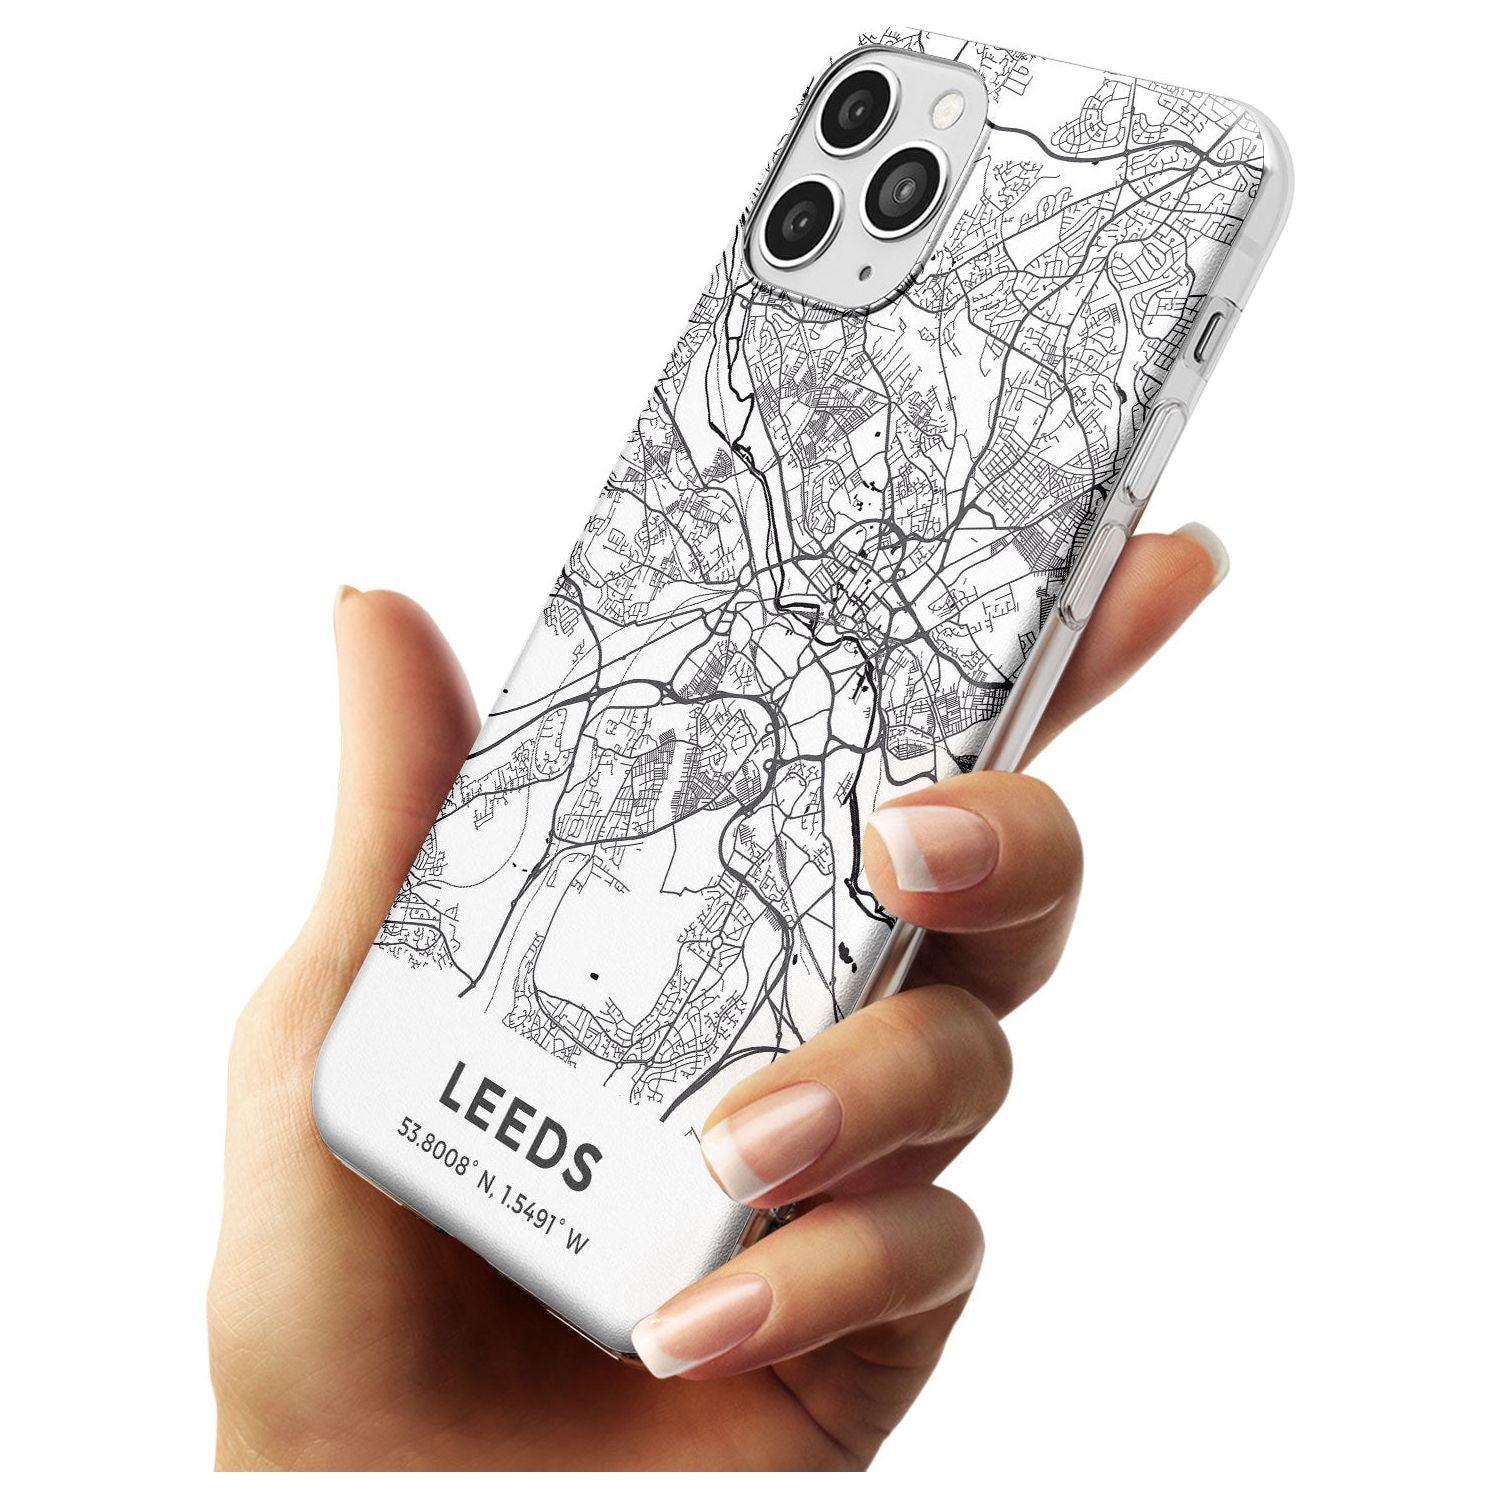 Map of Leeds, England Slim TPU Phone Case for iPhone 11 Pro Max